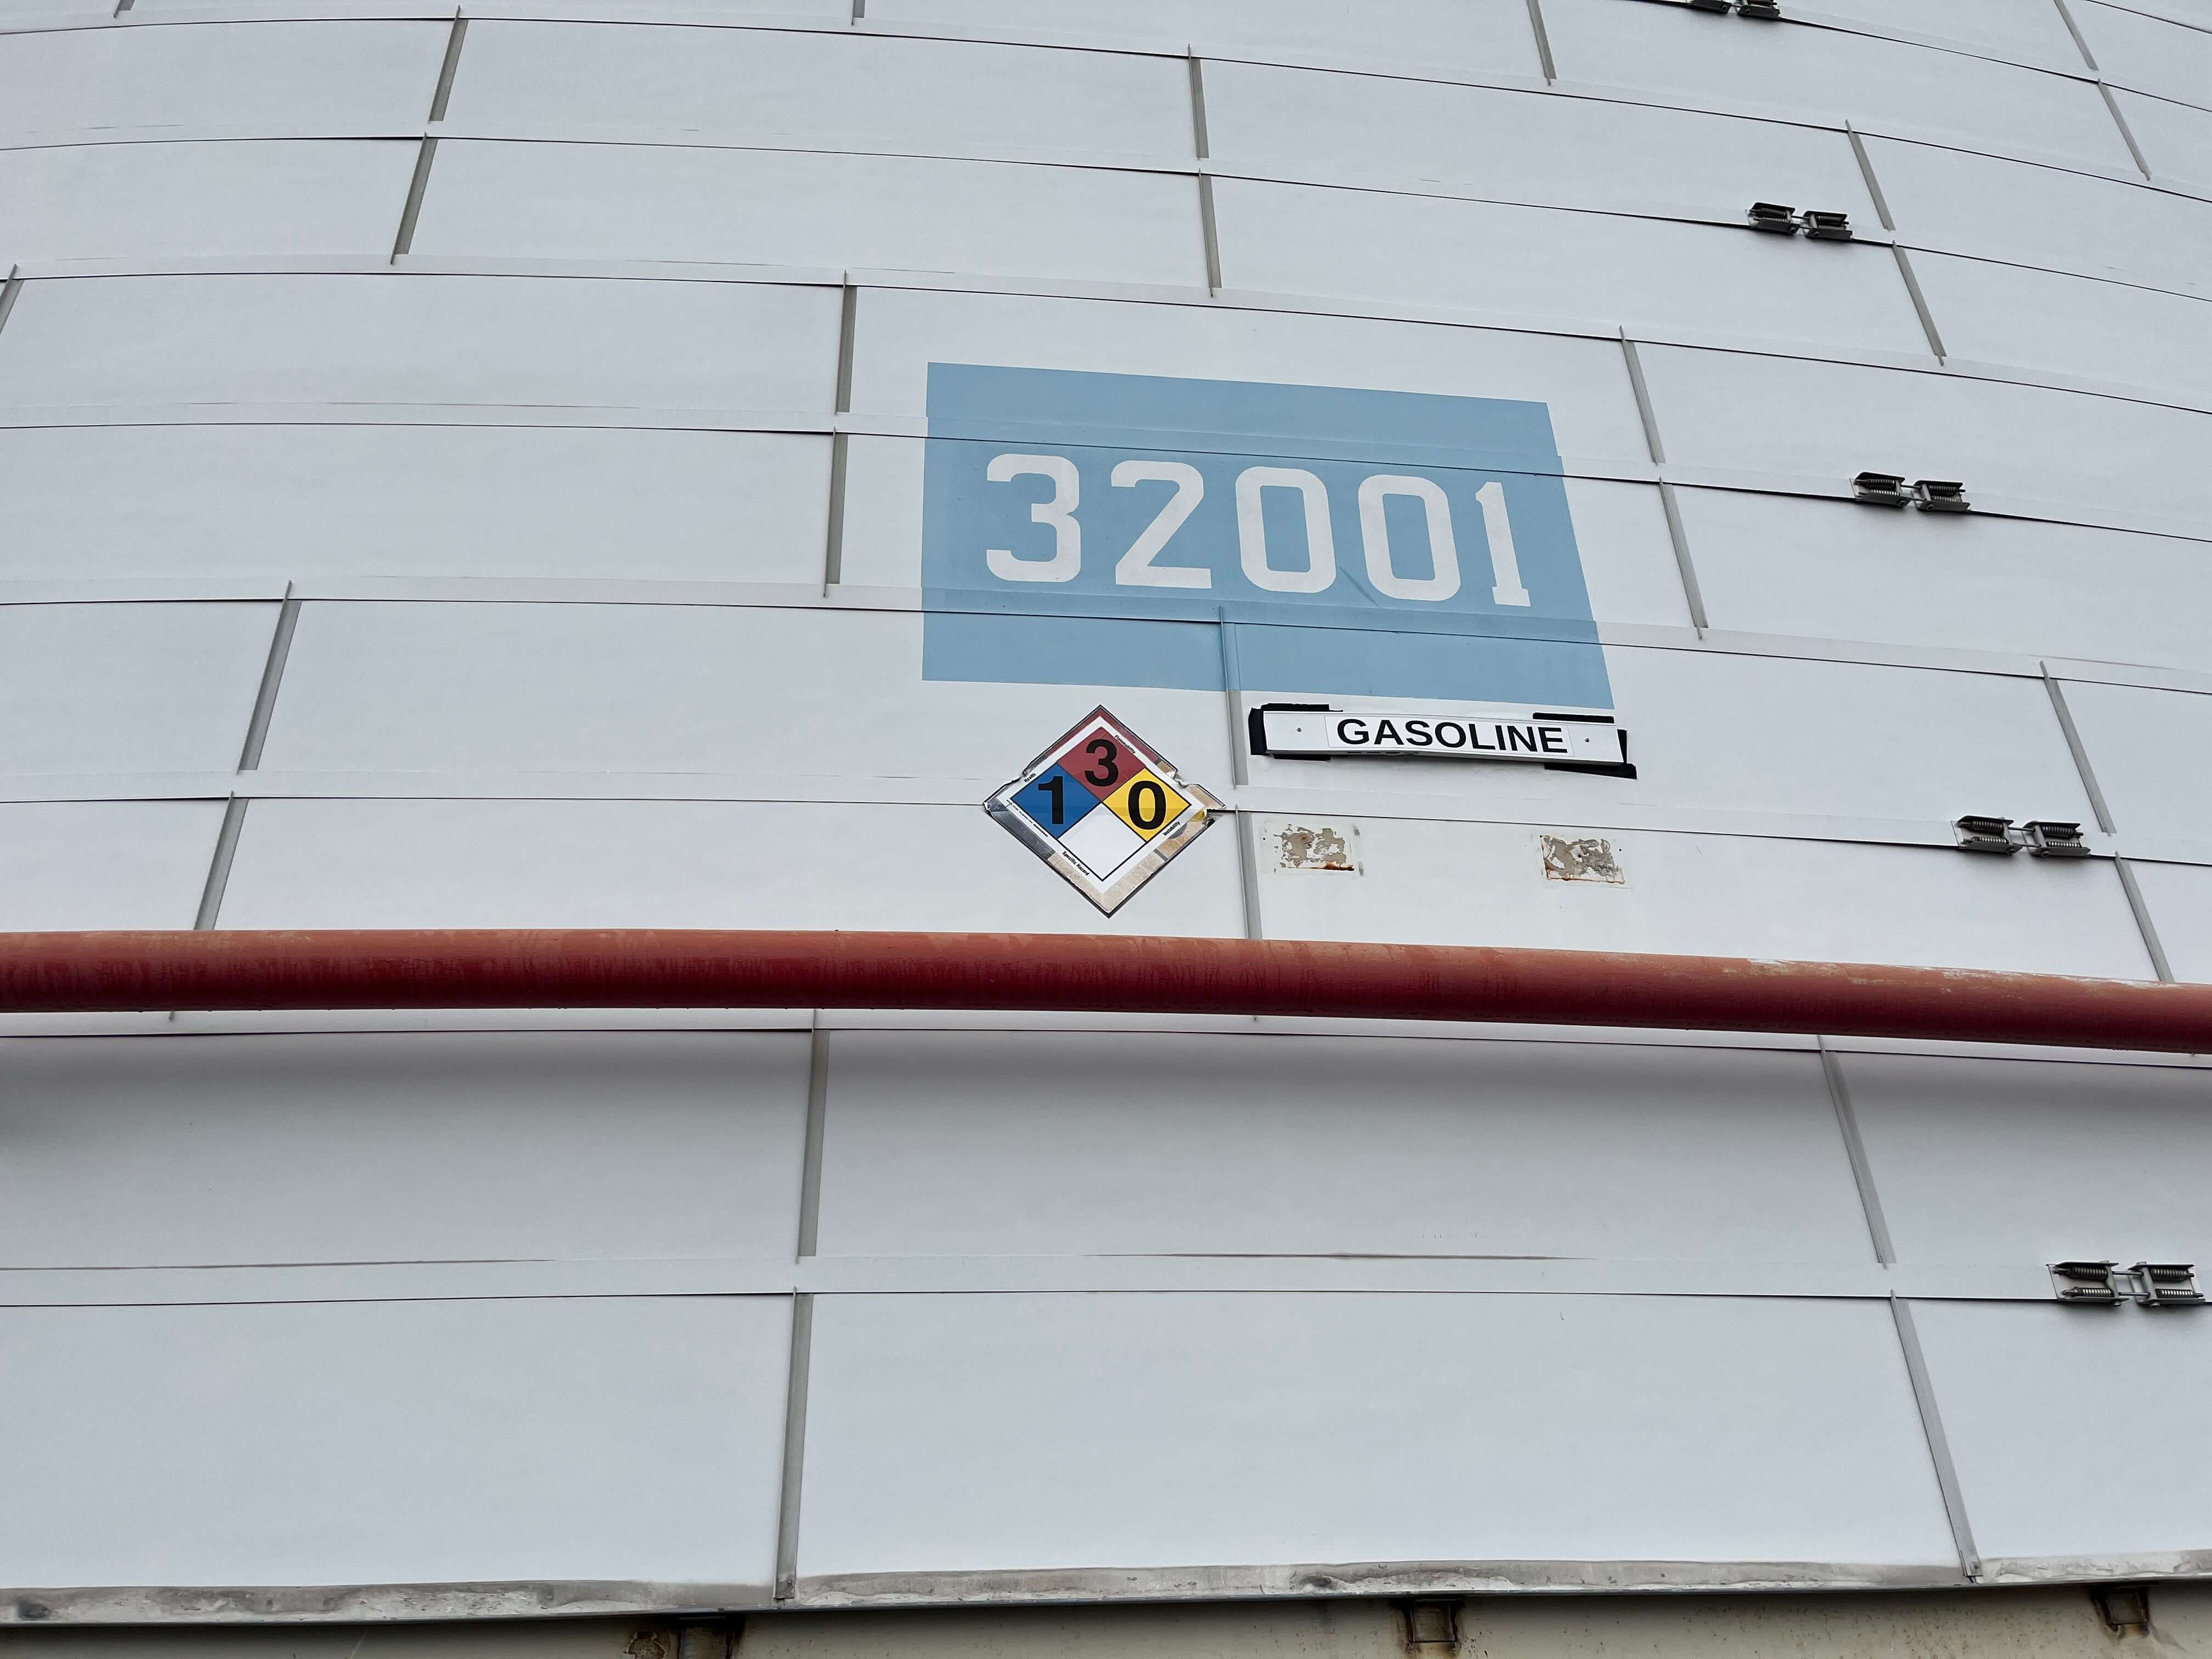 The number plate for SunocoLP’s Tank 32001 in Linden, New Jersey, is shown on the side of the tank.